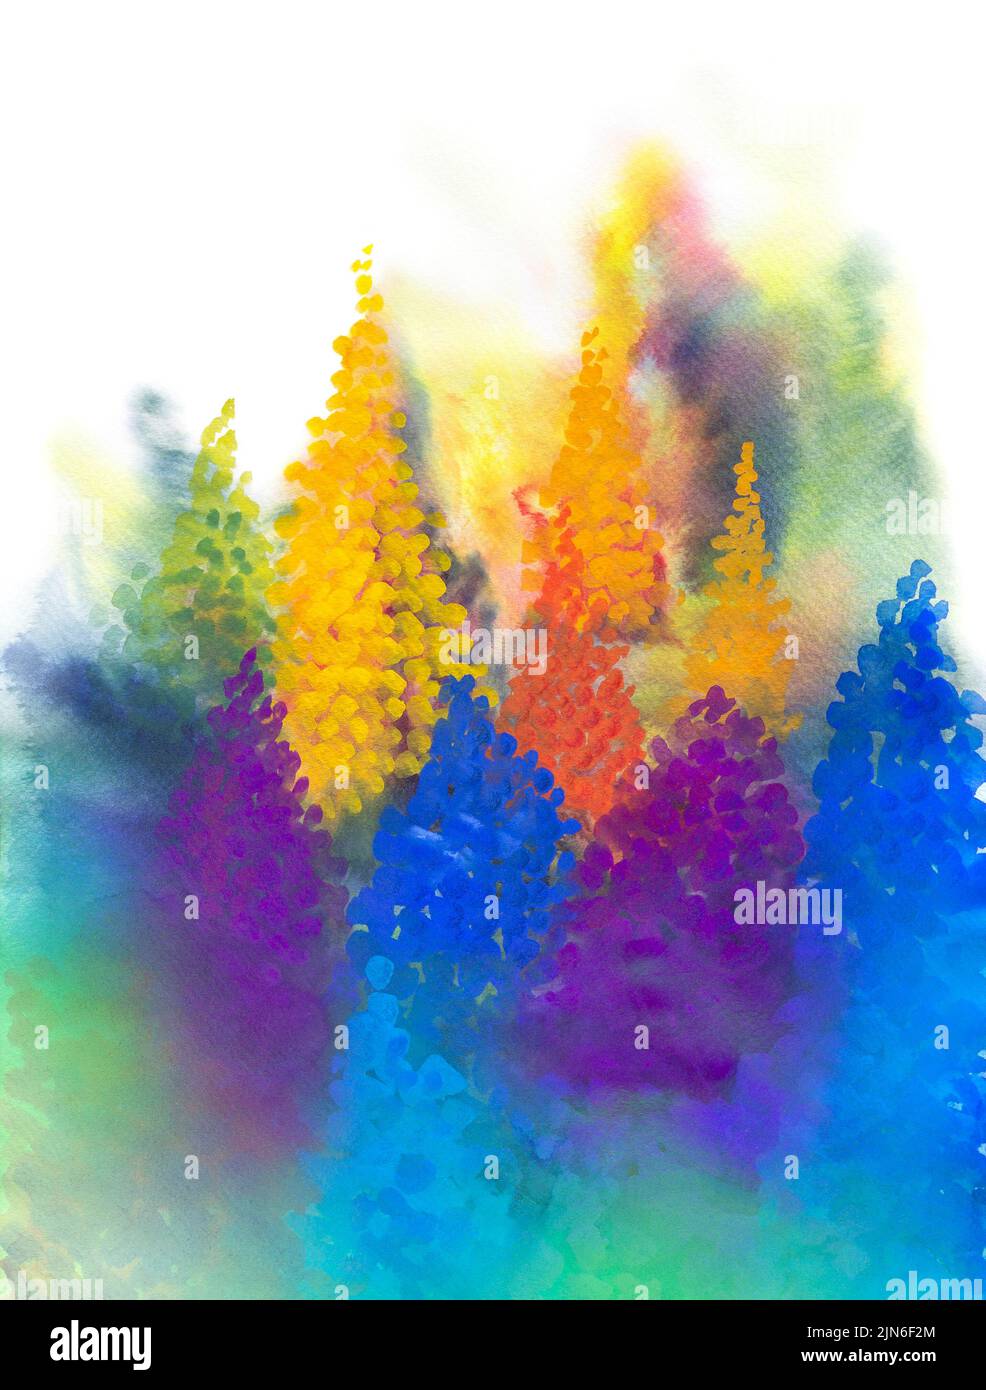 Abstract presentation of colorful lupine flower heads Stock Photo